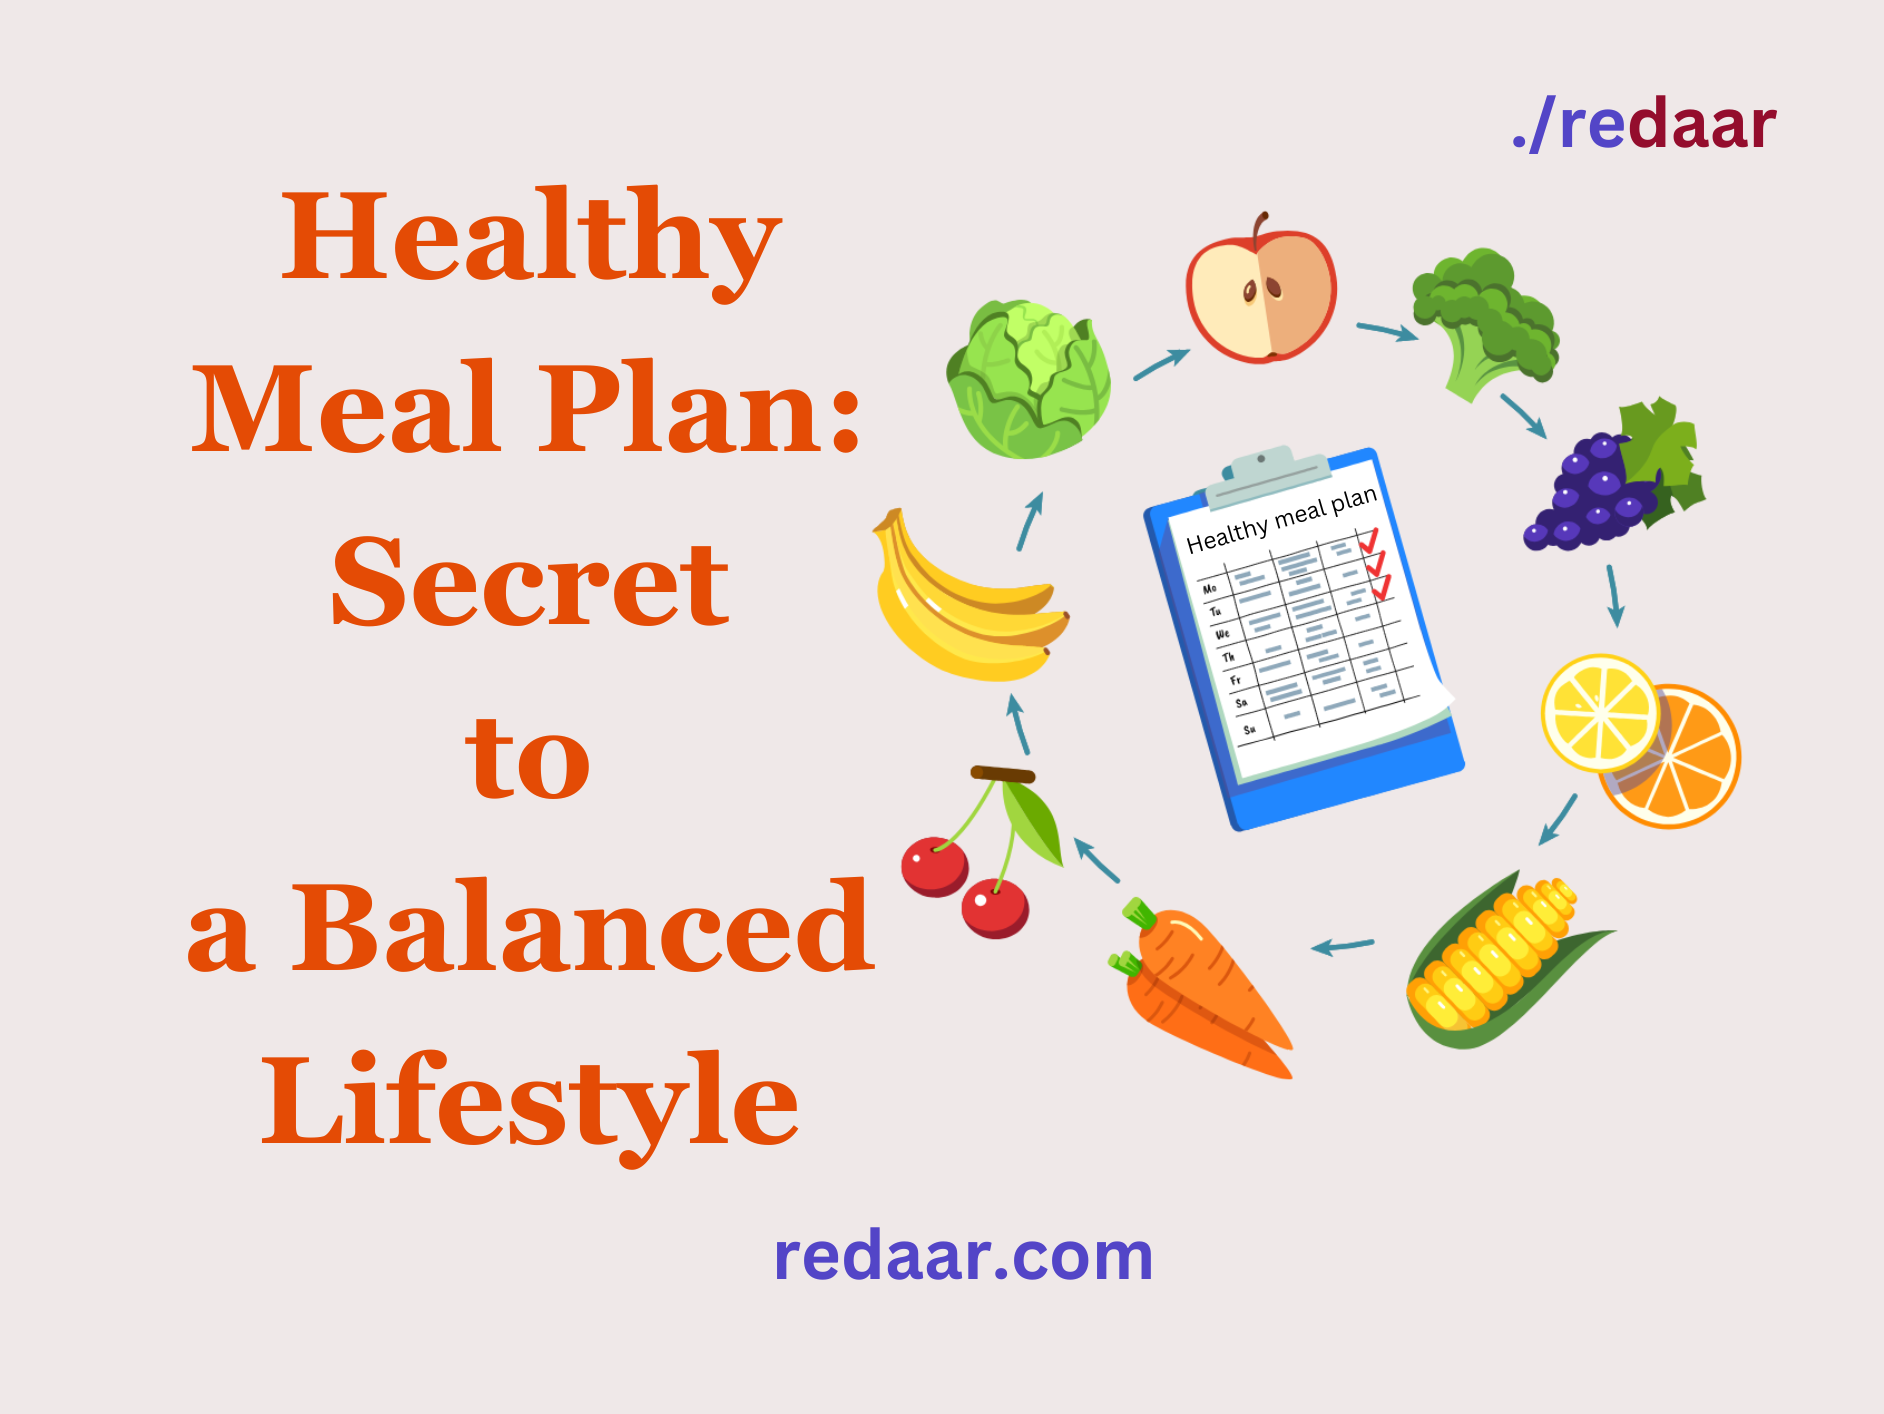 Healthy Meal Plan: Secret to a Balanced Lifestyle